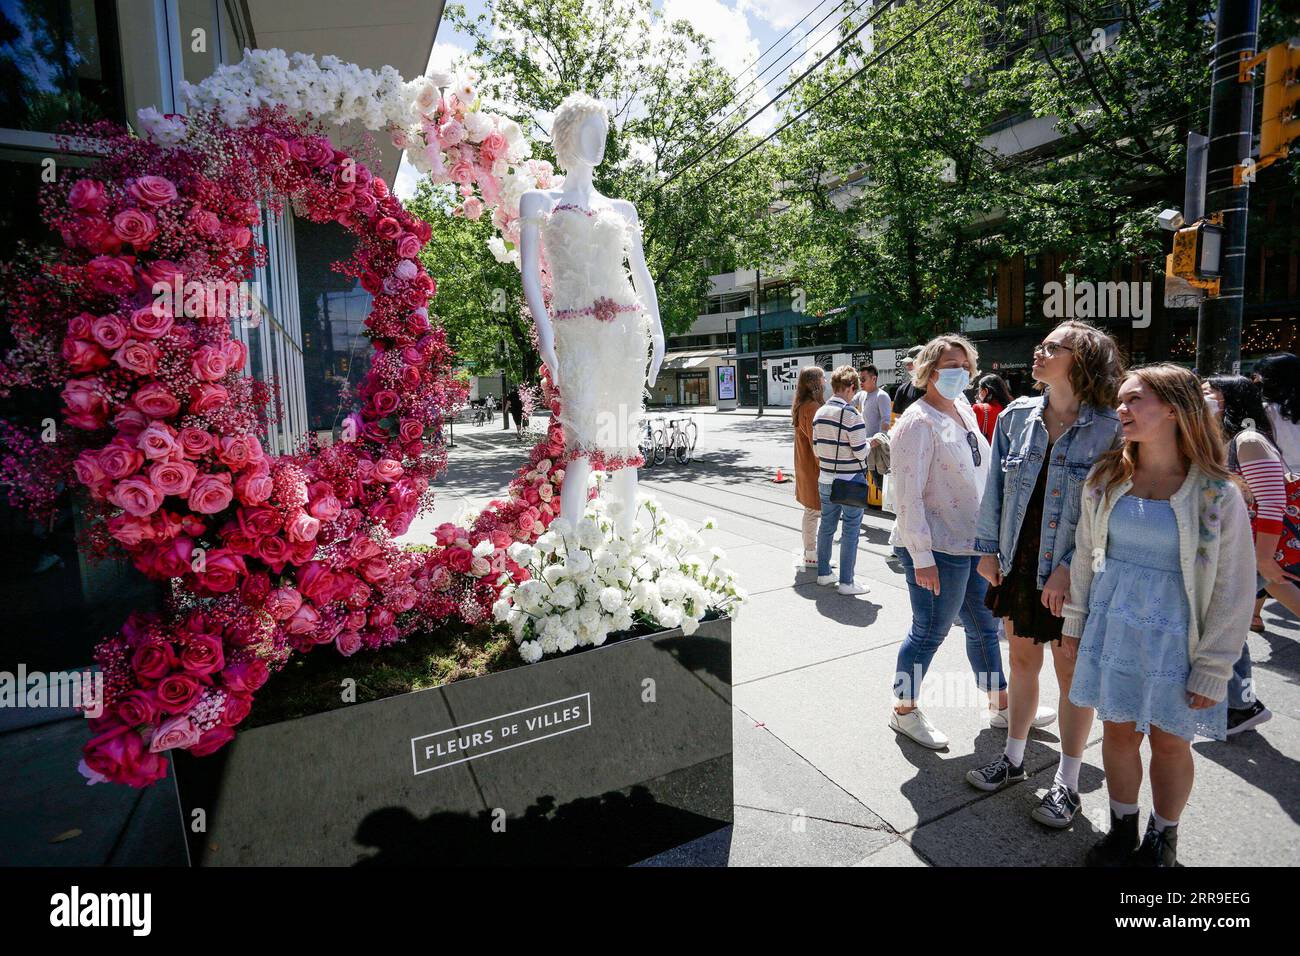 210613 -- VANCOUVER, June 13, 2021 -- People view a floral art installation during the Fleurs de Villes exhibition in Vancouver, British Columbia, Canada, June 12, 2021. Photo by /Xinhua CANADA-VANCOUVER-FLORAL ART EXHIBITION LiangxSen PUBLICATIONxNOTxINxCHN Stock Photo